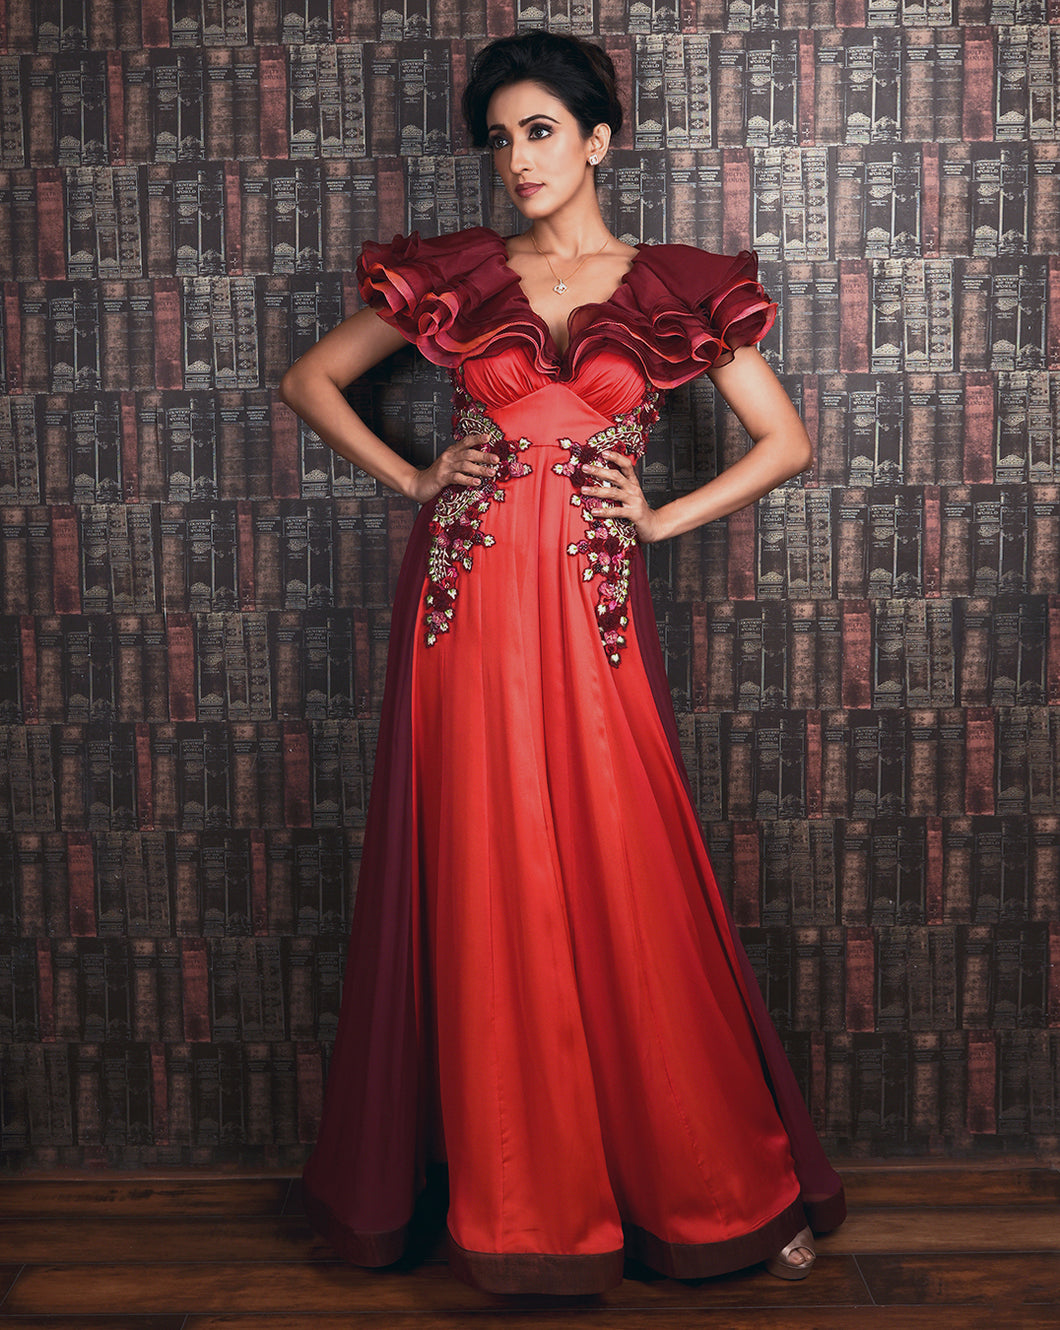 The Red Ruffle Gown